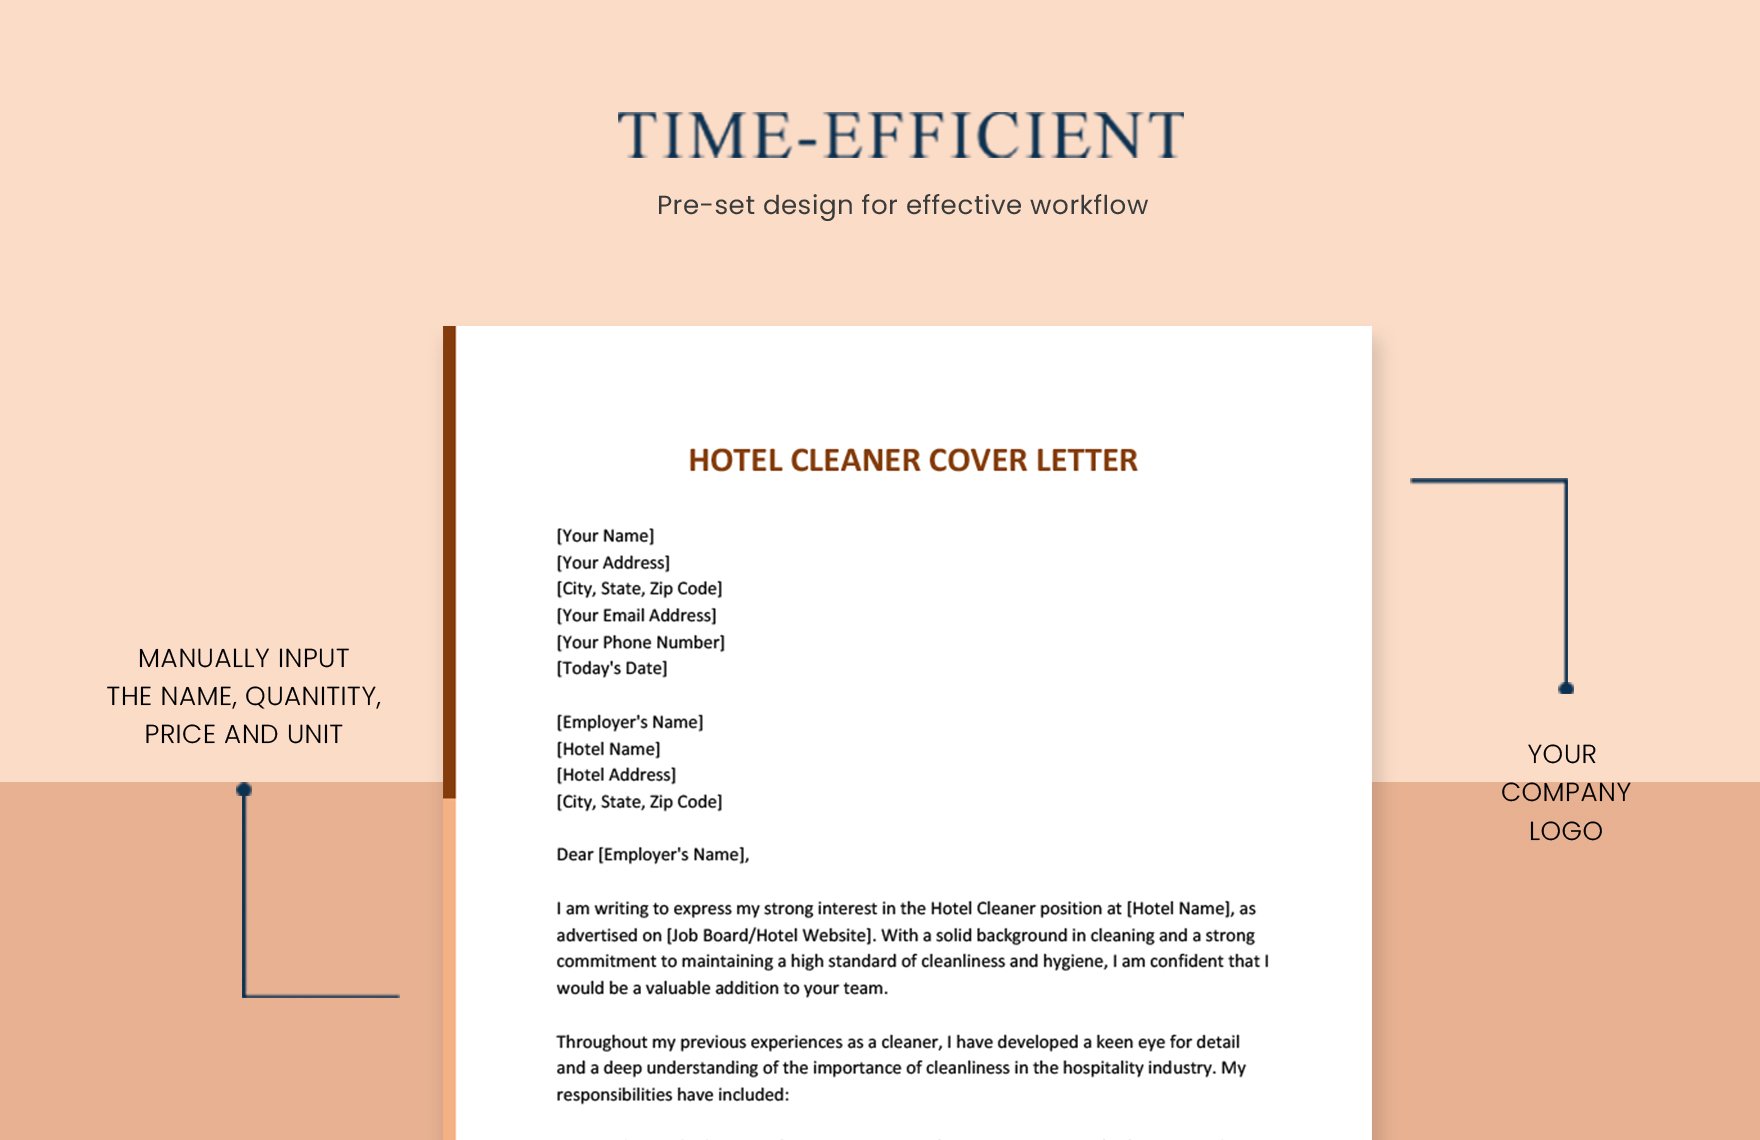 Hotel Cleaner Cover Letter